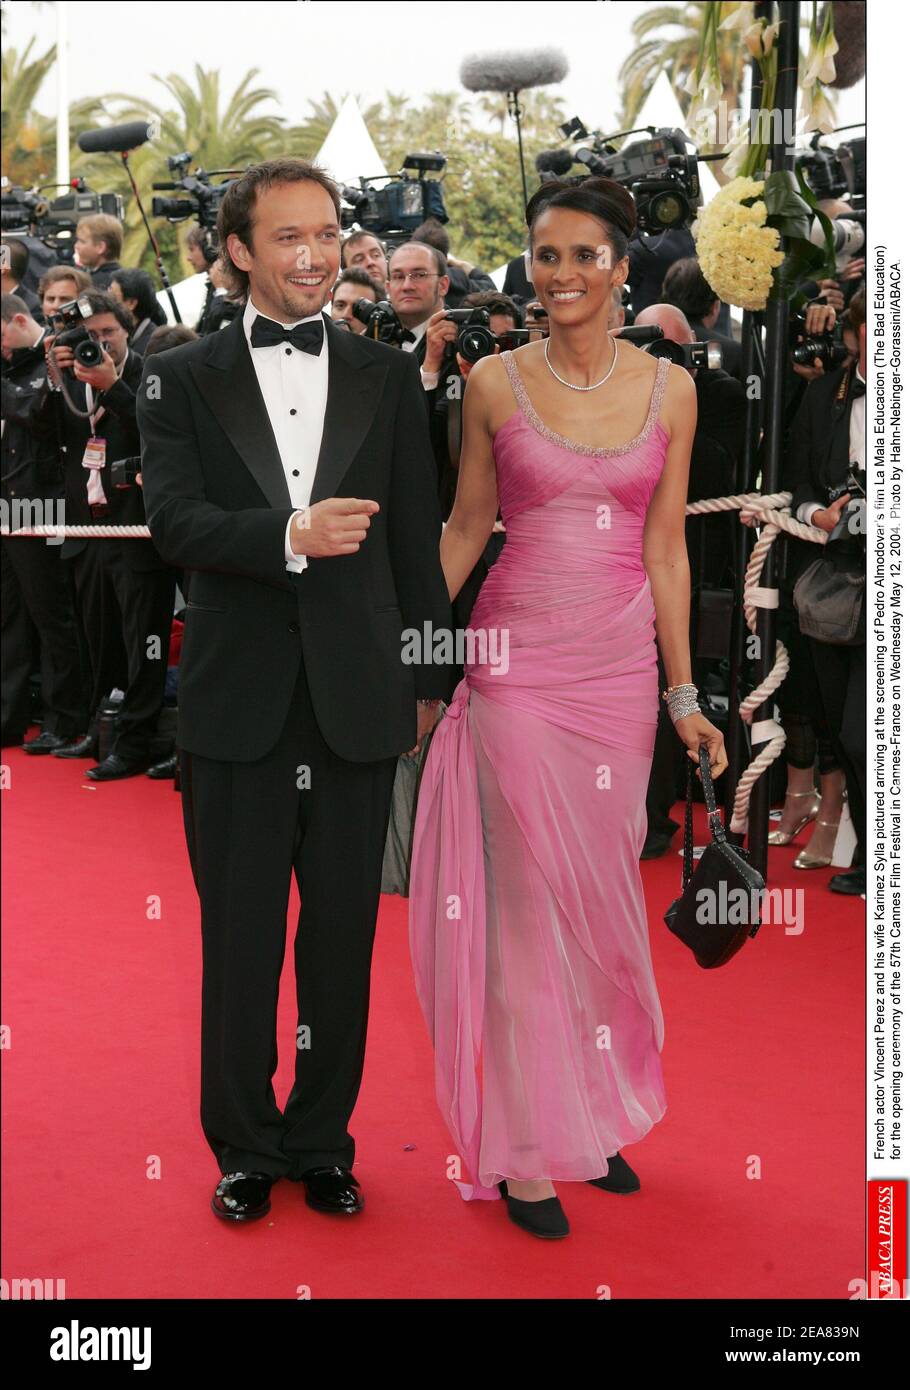 Swiss actor Vincent Perez and his wife Karinez Sylla pictured arriving at the screening of Pedro Almodovar's film La Mala Educacion (The Bad Education) for the opening ceremony of the 57th Cannes Film Festival in Cannes-France on Wednesday May 12, 2004. Photo by Hahn-Nebinger-Gorassini/ABACA. Stock Photo